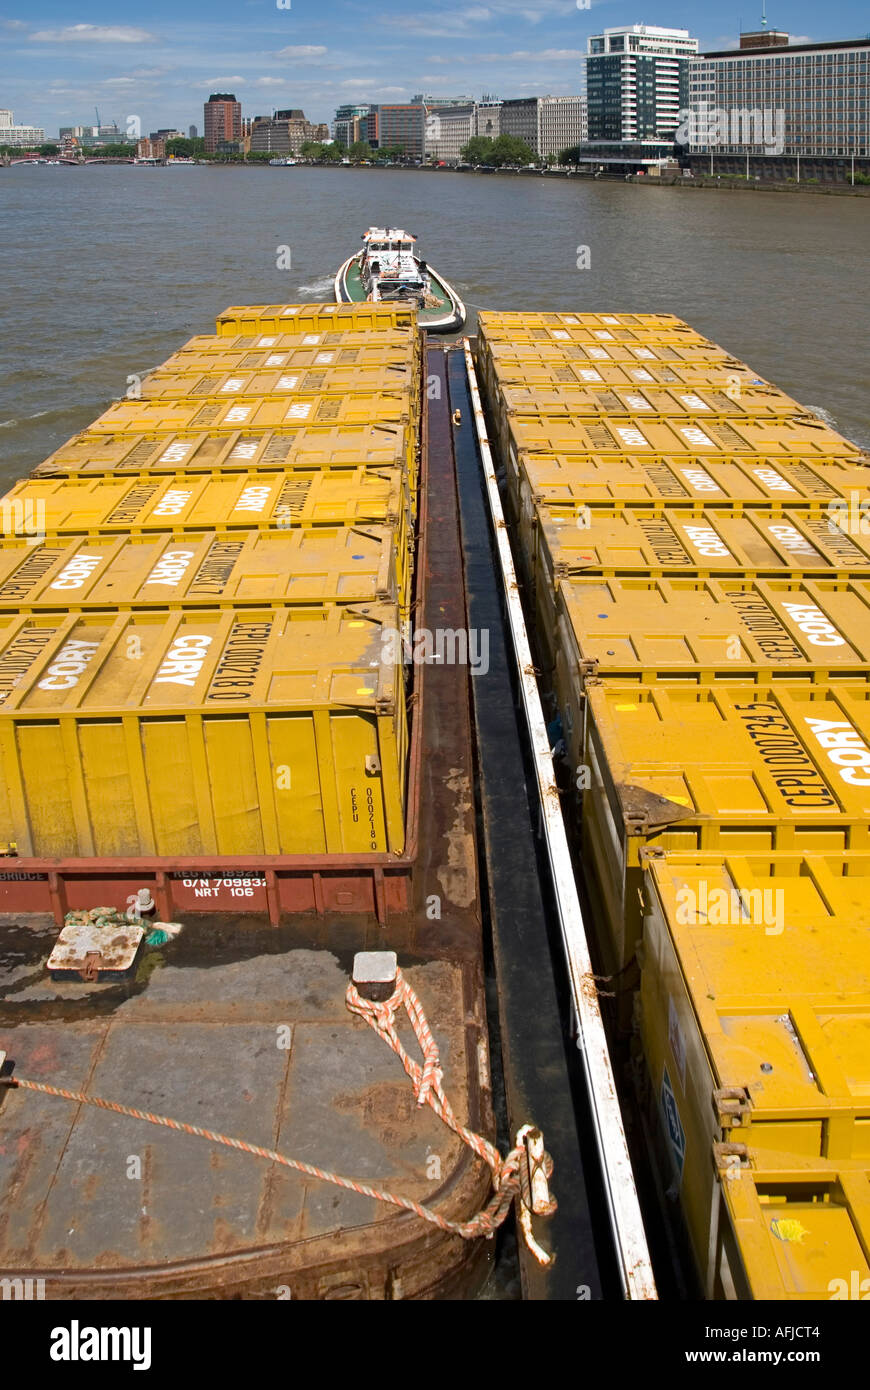 River Thames and Cory waste management company tug towing barges down river loaded with containers full of refuse Stock Photo